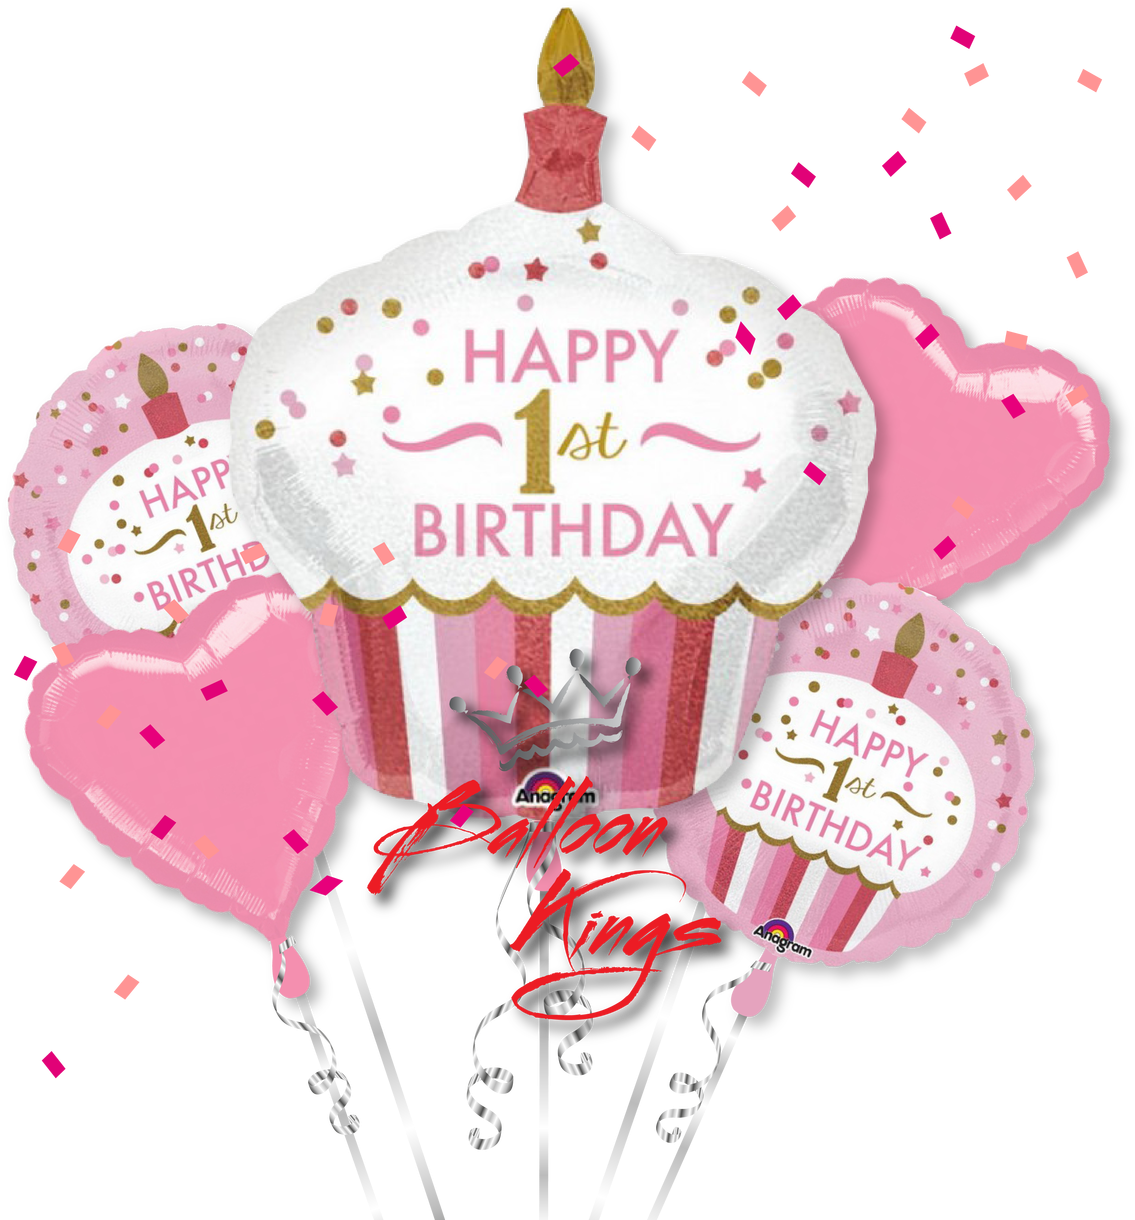 1st Birthday PNG Image File